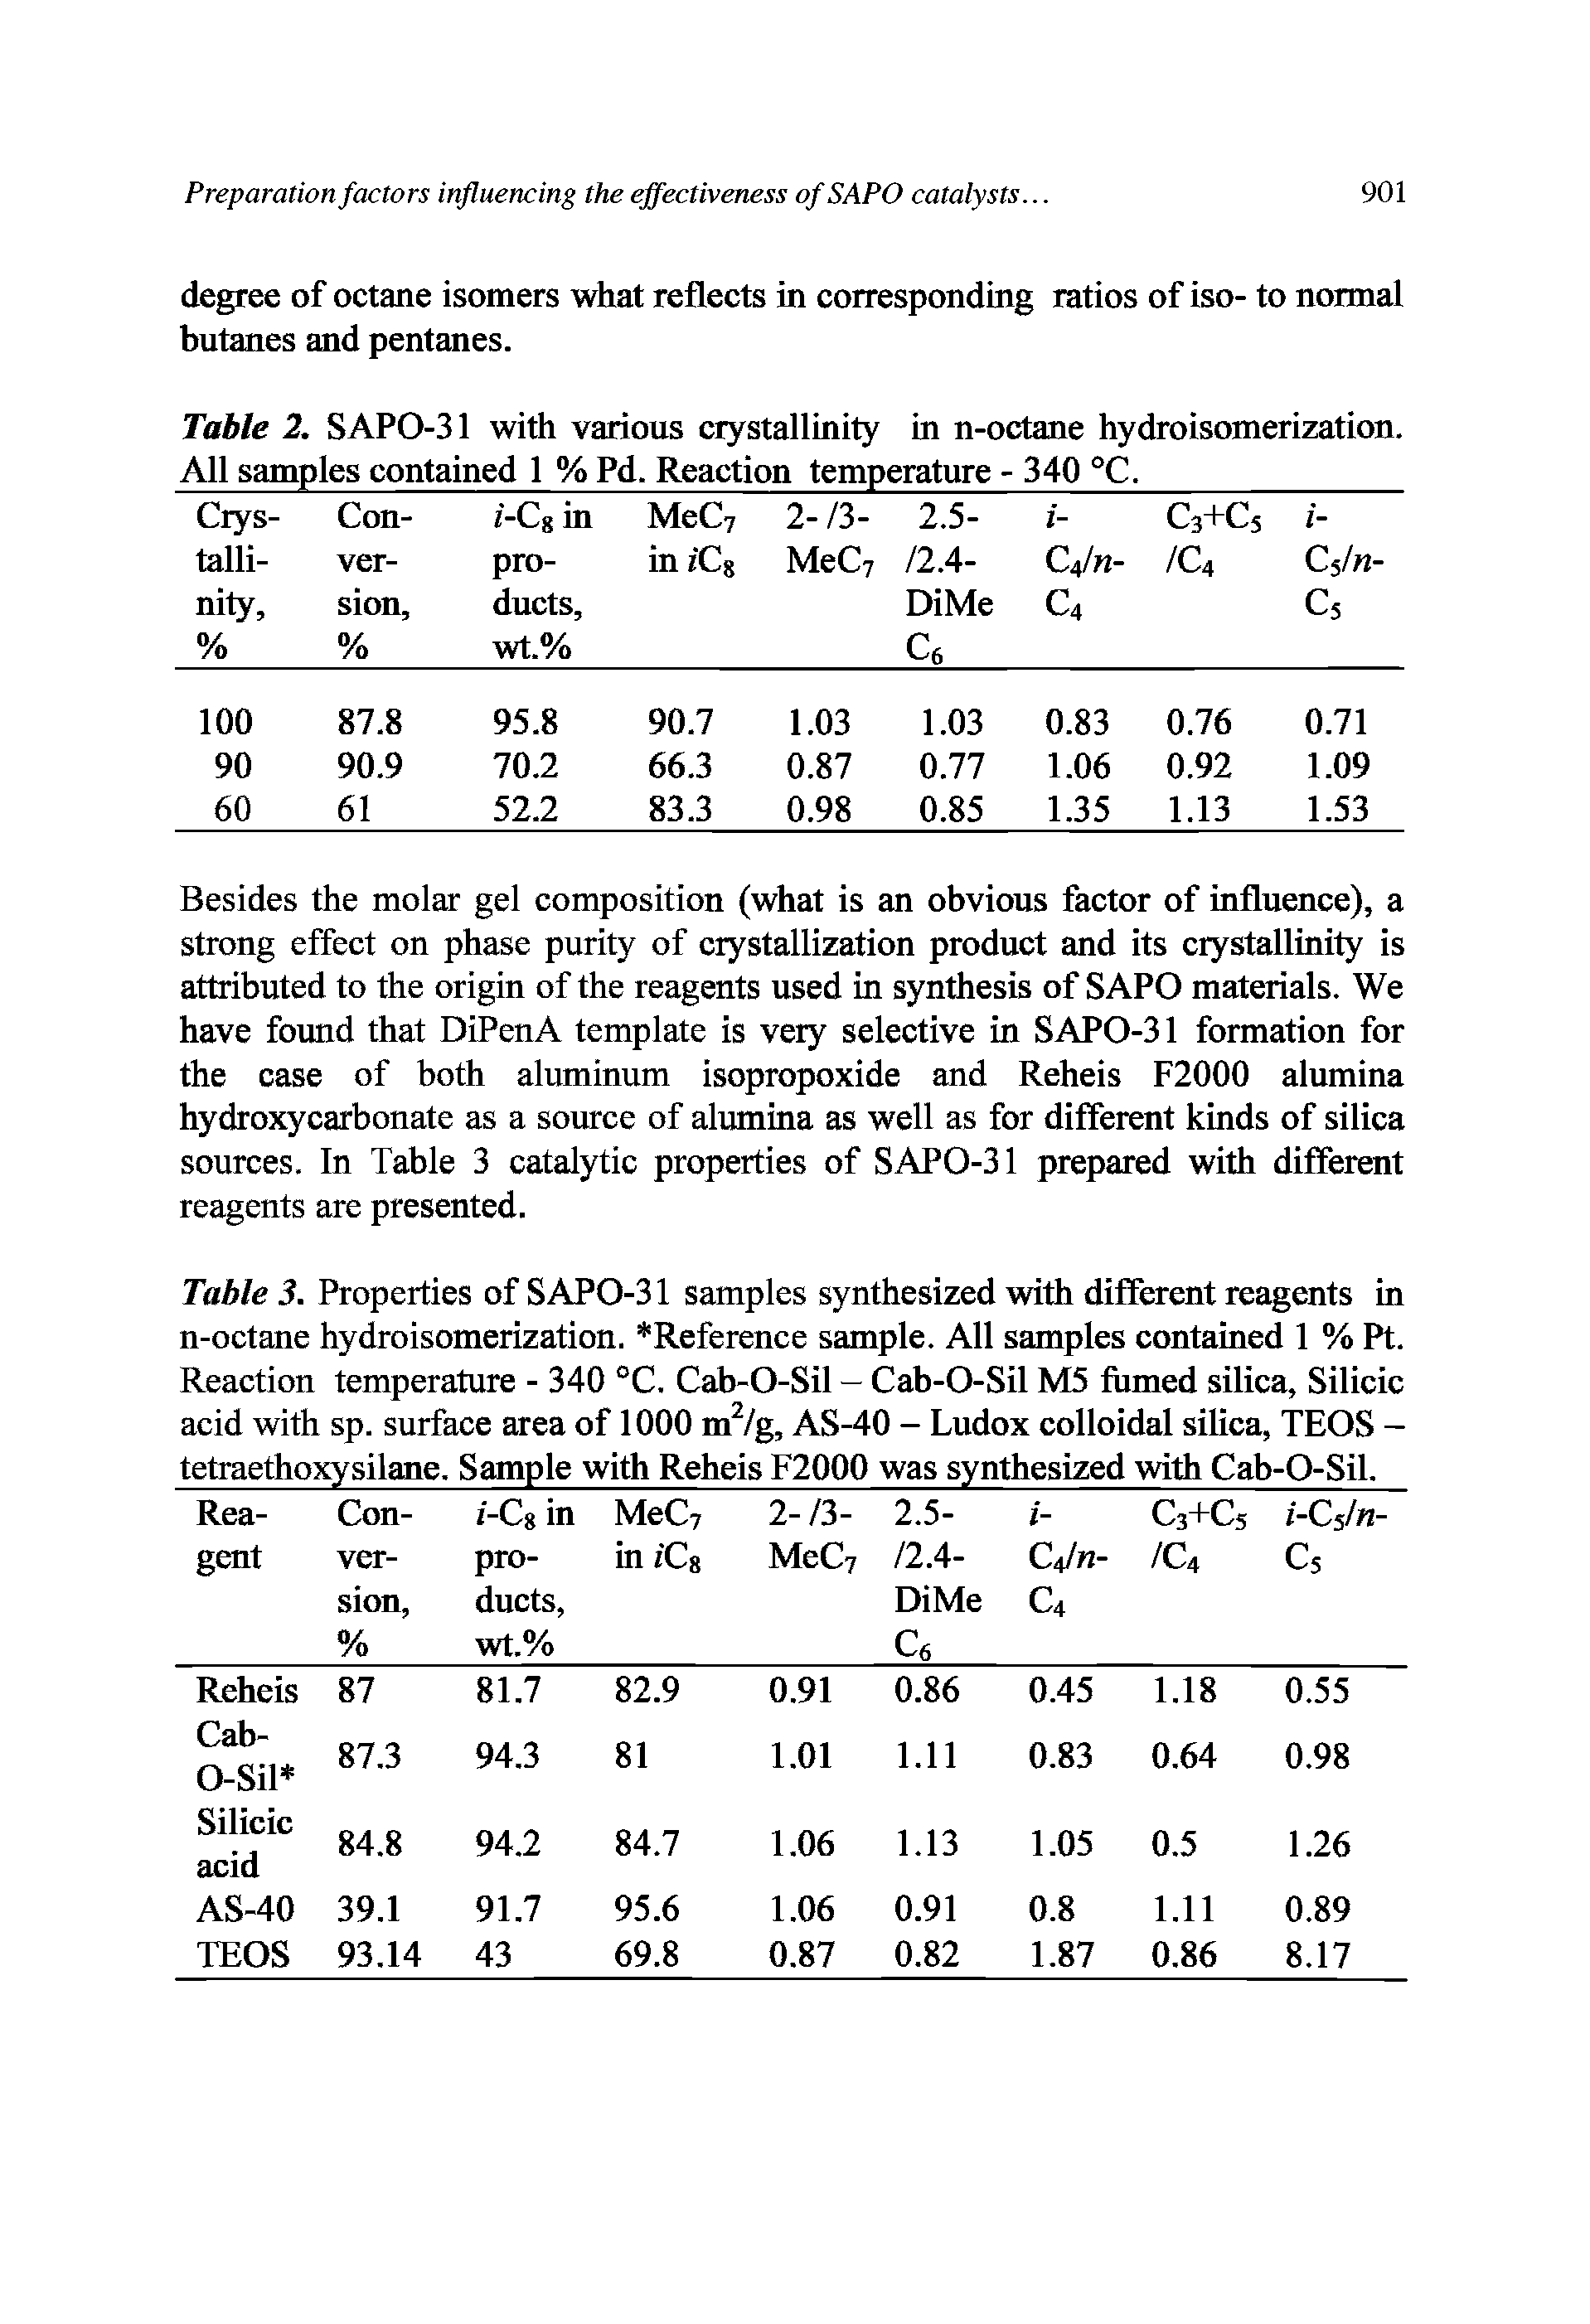 Table 3. Properties of SAPO-31 samples synthesized with different reagents in n-octane hydroisomerization. Reference sample. All samples contained 1 % Pt. Reaction temperature - 340 °C. Cab-O-Sil - Cab-O-Sil M5 firmed silica. Silicic acid with sp. surface area of 1000 m /g, AS-40 - Ludox colloidal silica, TEOS -tetraethoxysilane. Sample with Reheis F2000 was synthesized with Cab-O-Sil.